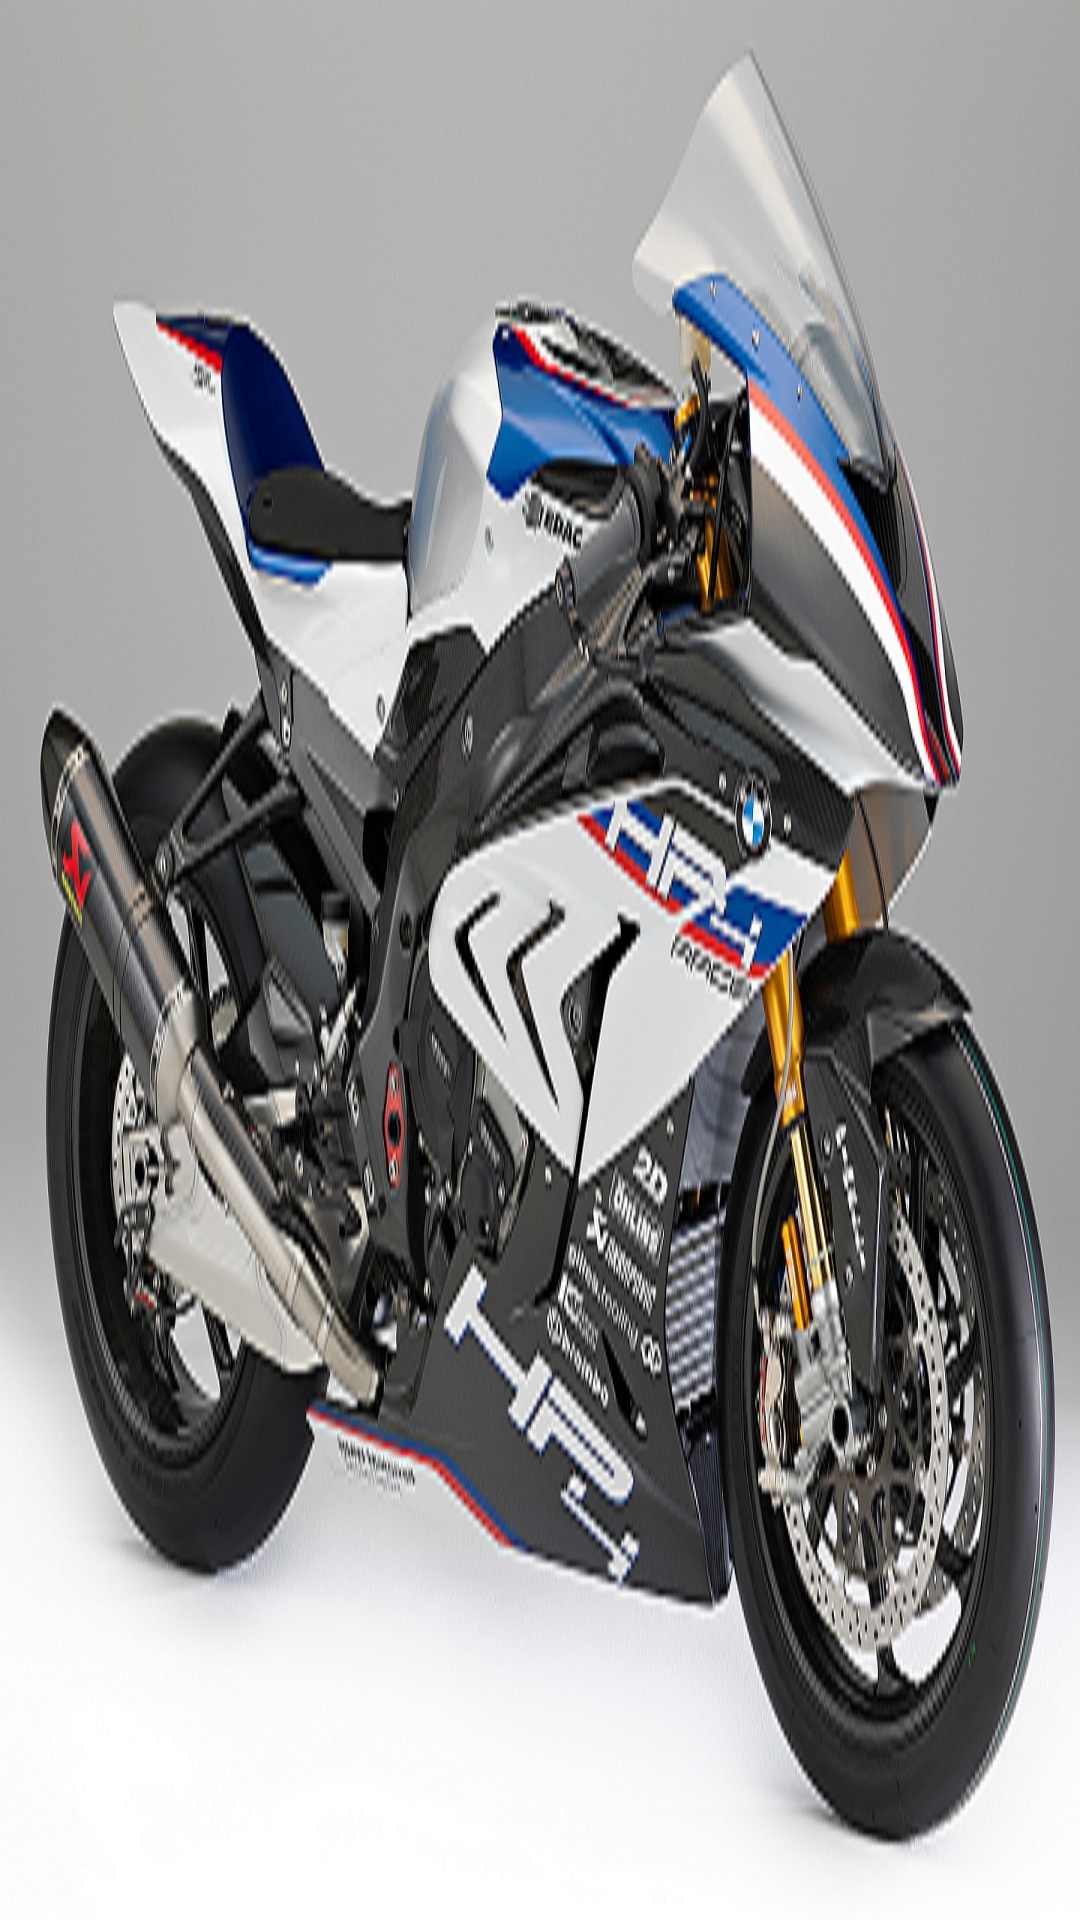 BMW HP4 for Apple iPhone 6S & 7 Plus resolution